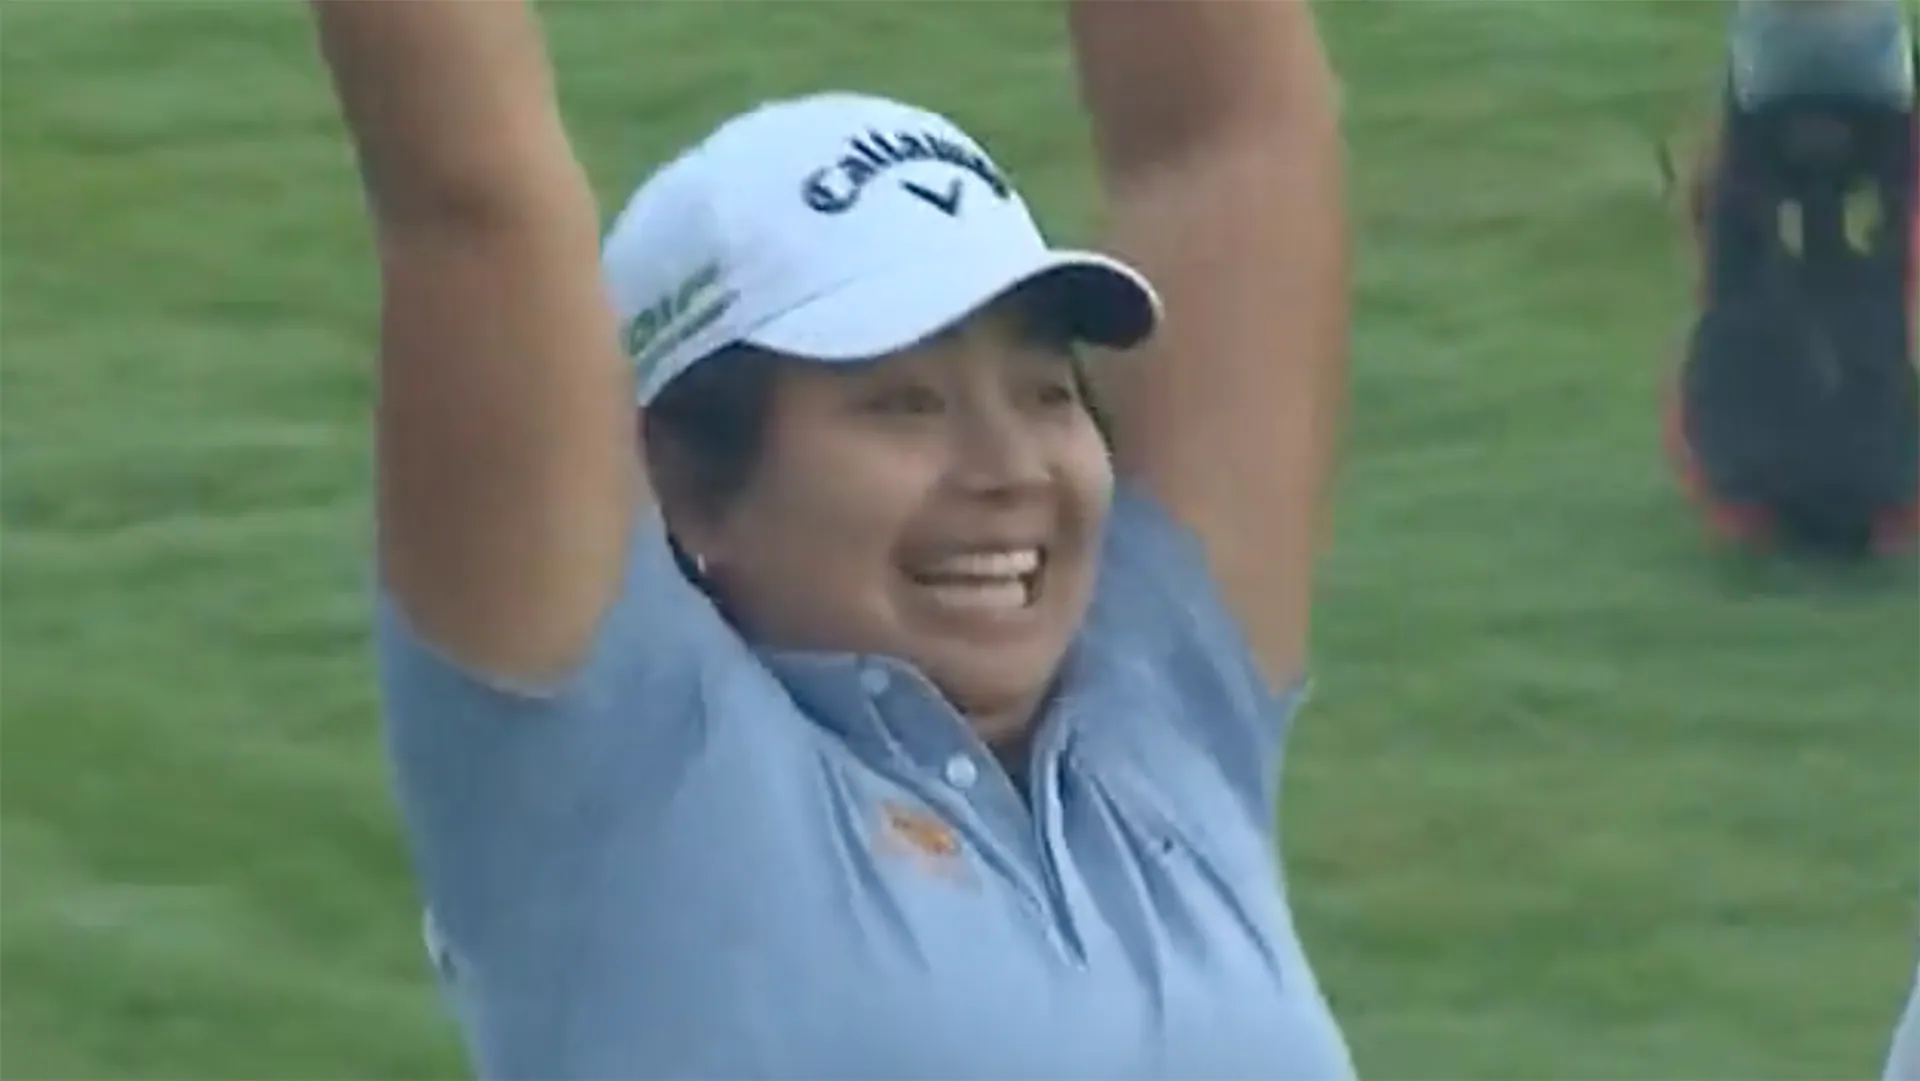 No speed limit: Another ace, another Lamborghini won at LPGA event 2